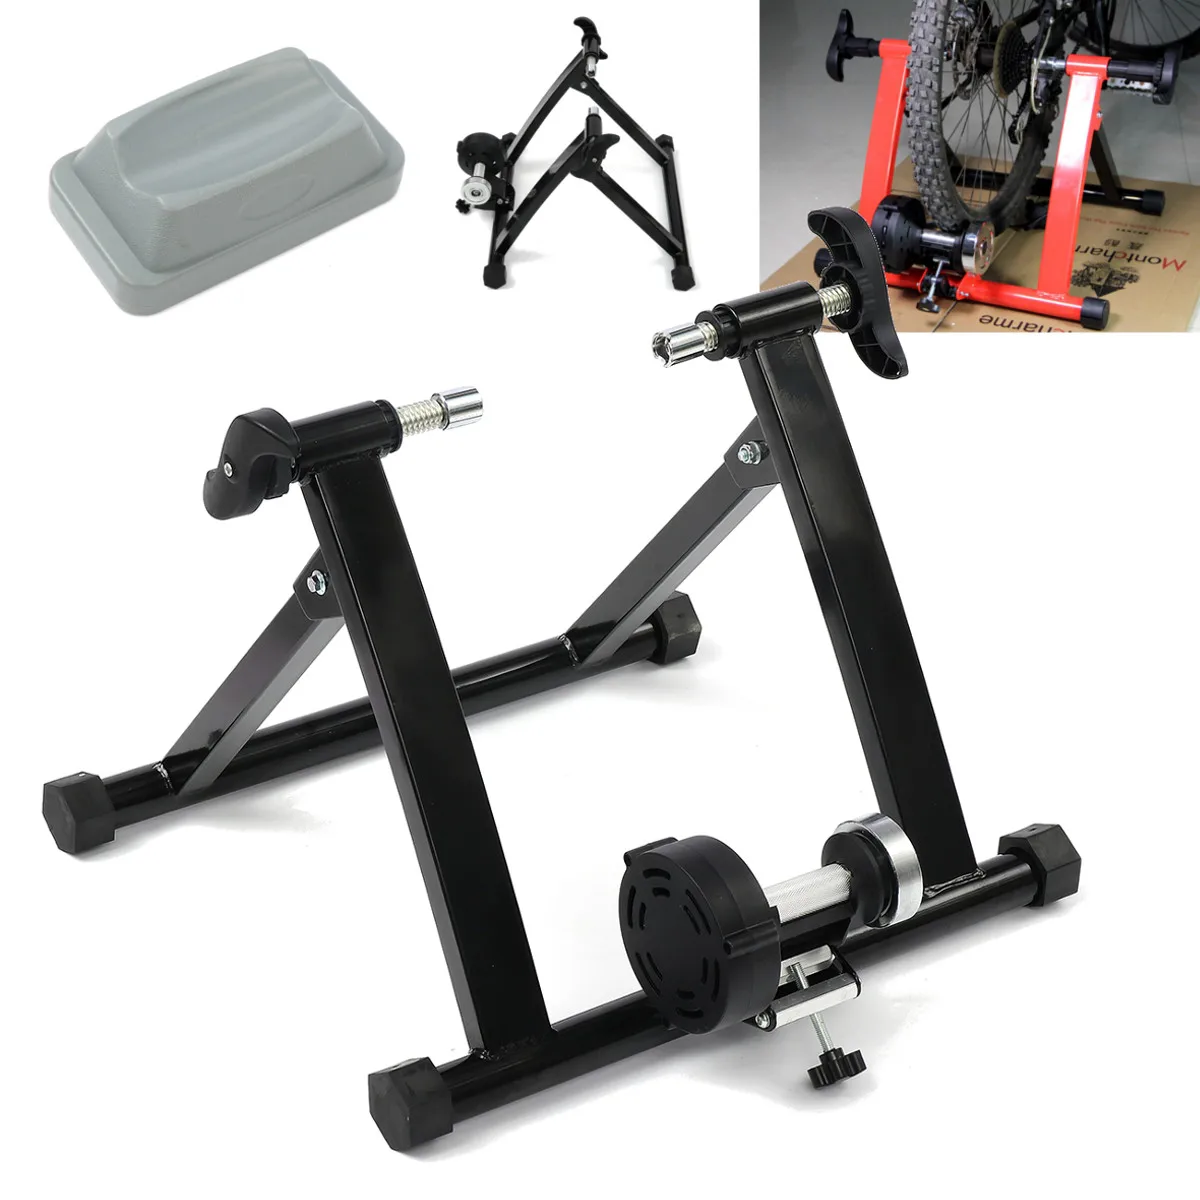 

Portable Cycle Bike Trainer 24-29 Inch Indoor Bicycle Bike Trainer Exercise Fitness Magnetic Stand 150kg